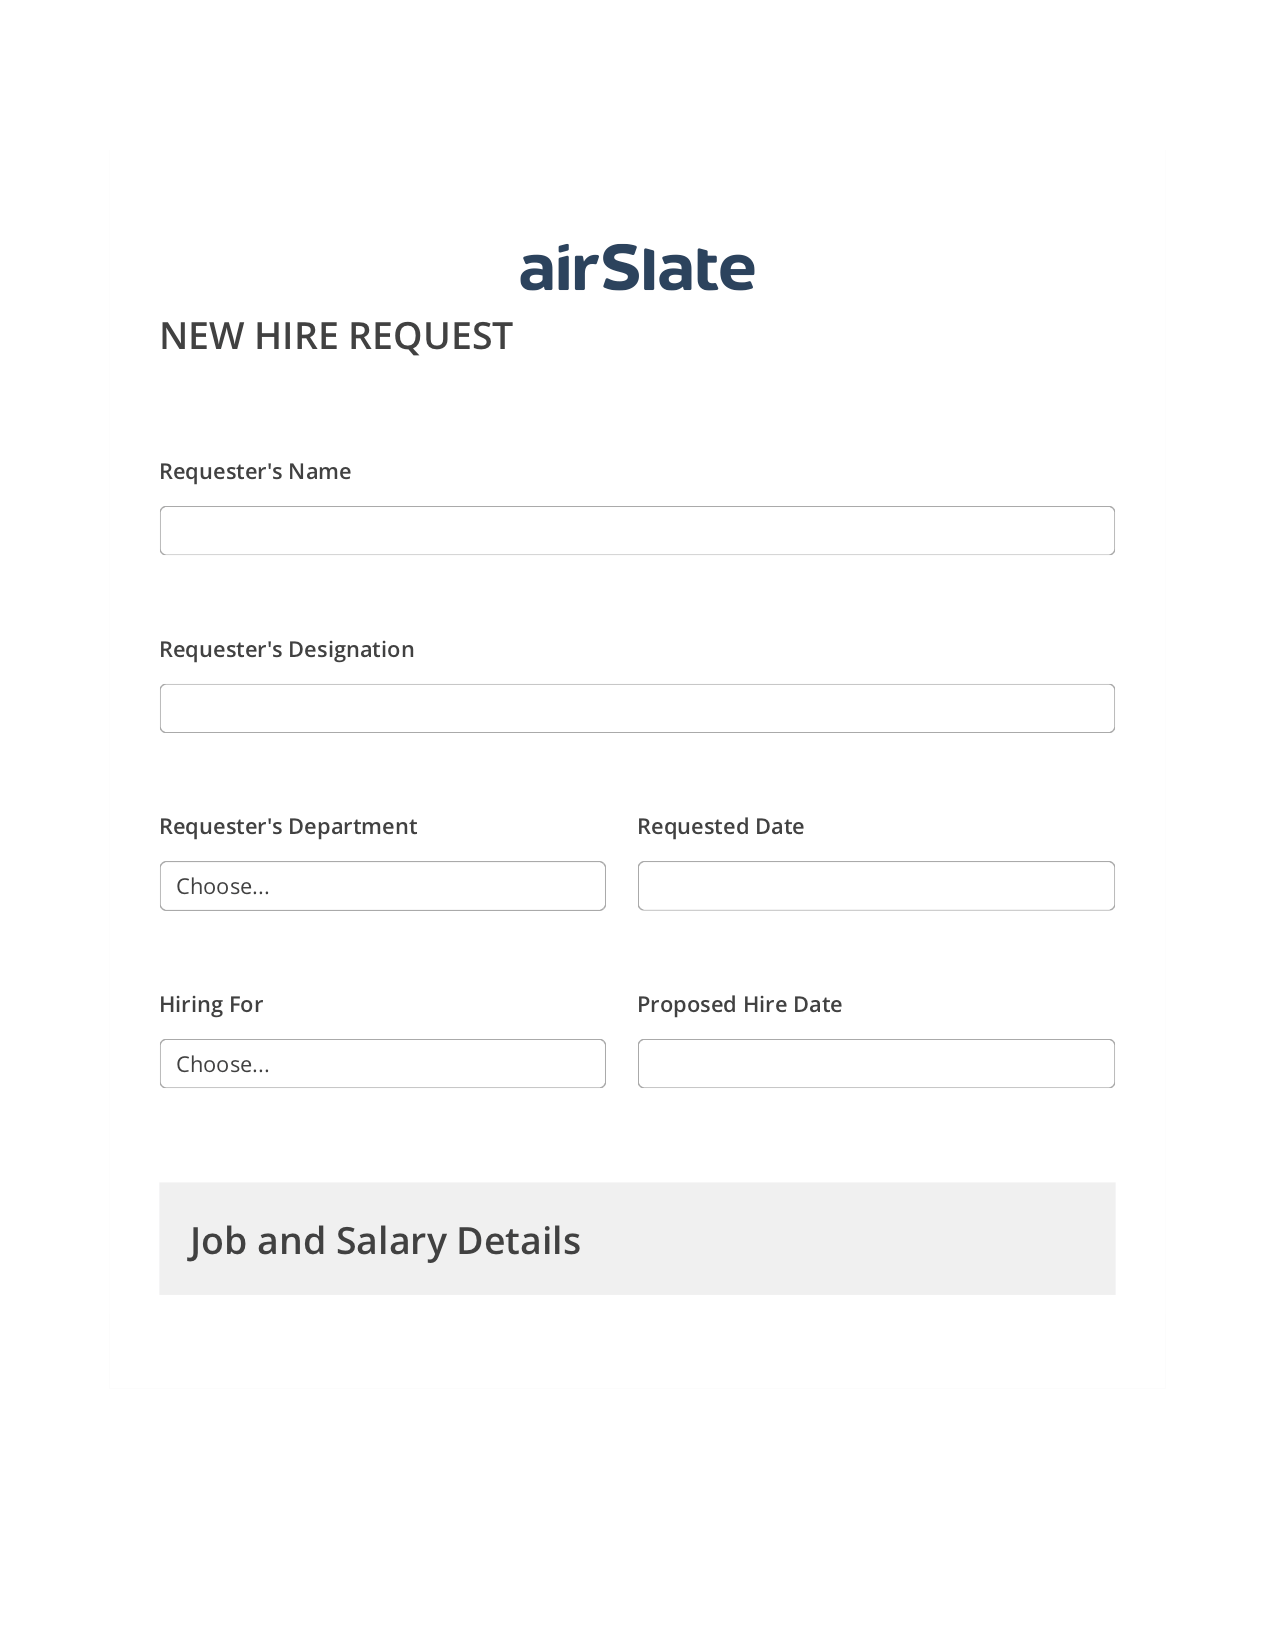 Hiring Request Workflow Prefill from NetSuite records, Email Notification Bot, Archive to Dropbox Bot